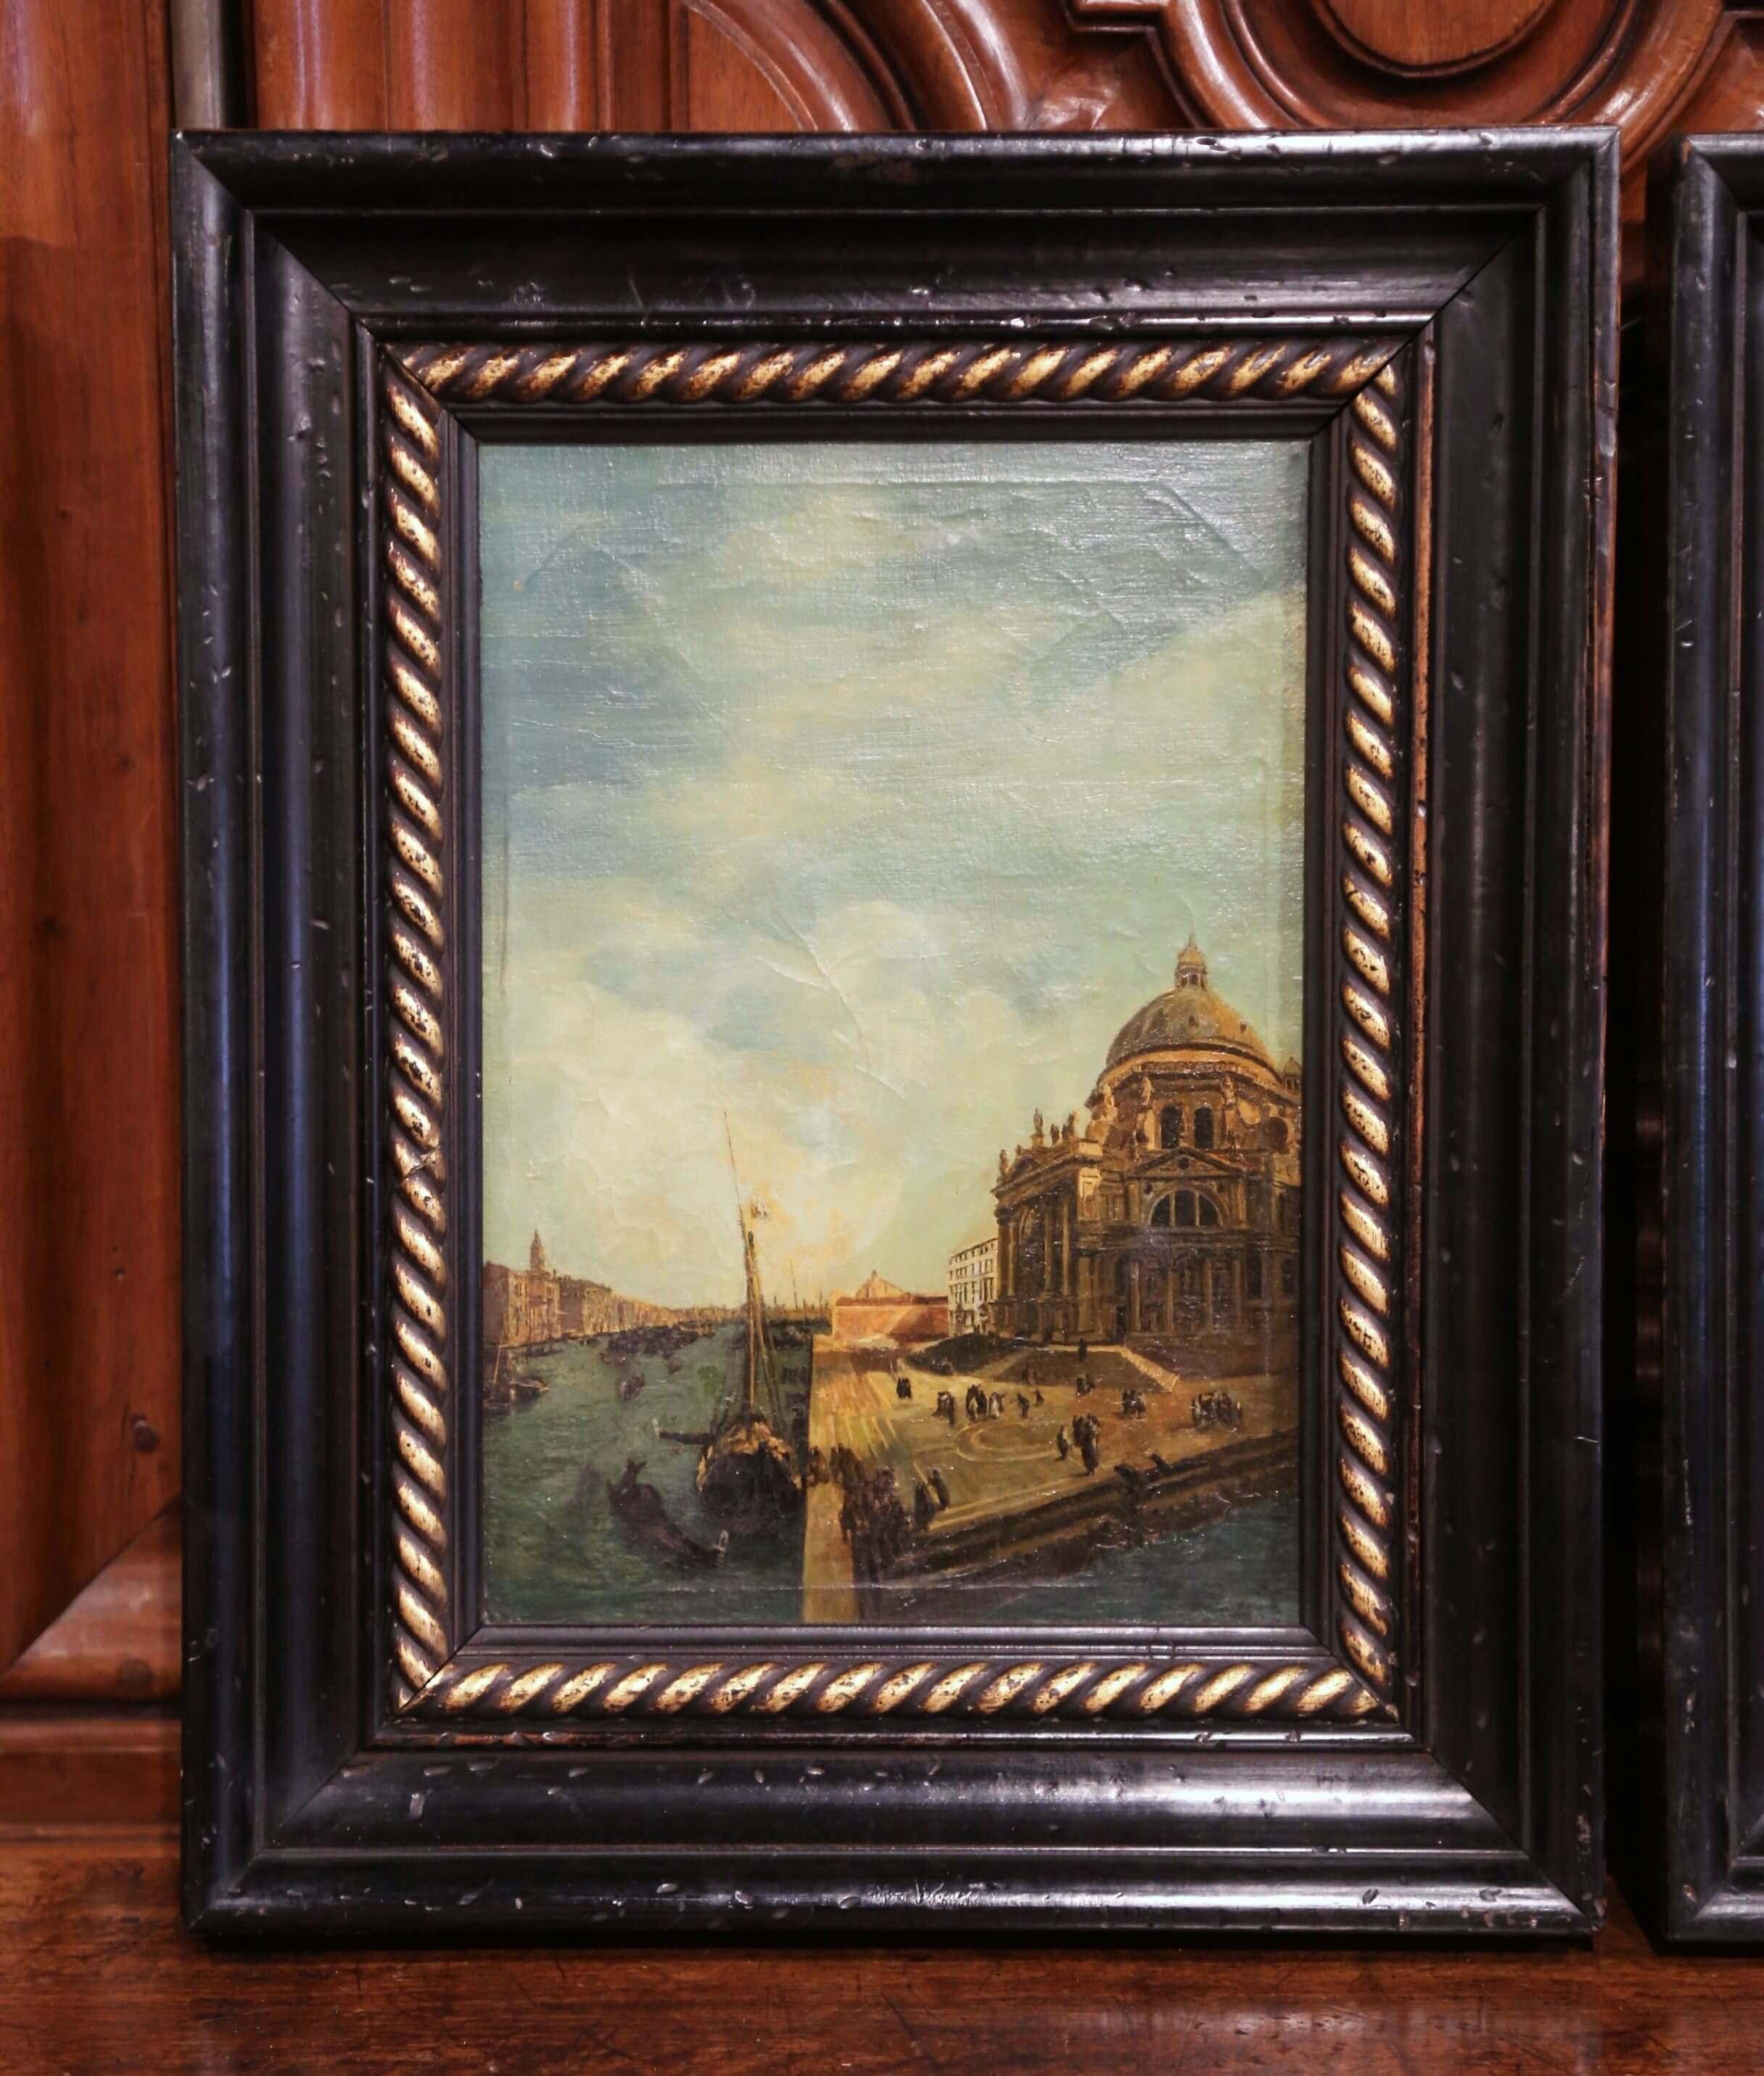 Bring memories of your travels abroad home with this elegant pair of 19th century Venetian paintings. Painted in Italy circa 1870, each painting is set inside a blackened frame with gilt accents, and depicts a famous Venice landmark. One painting